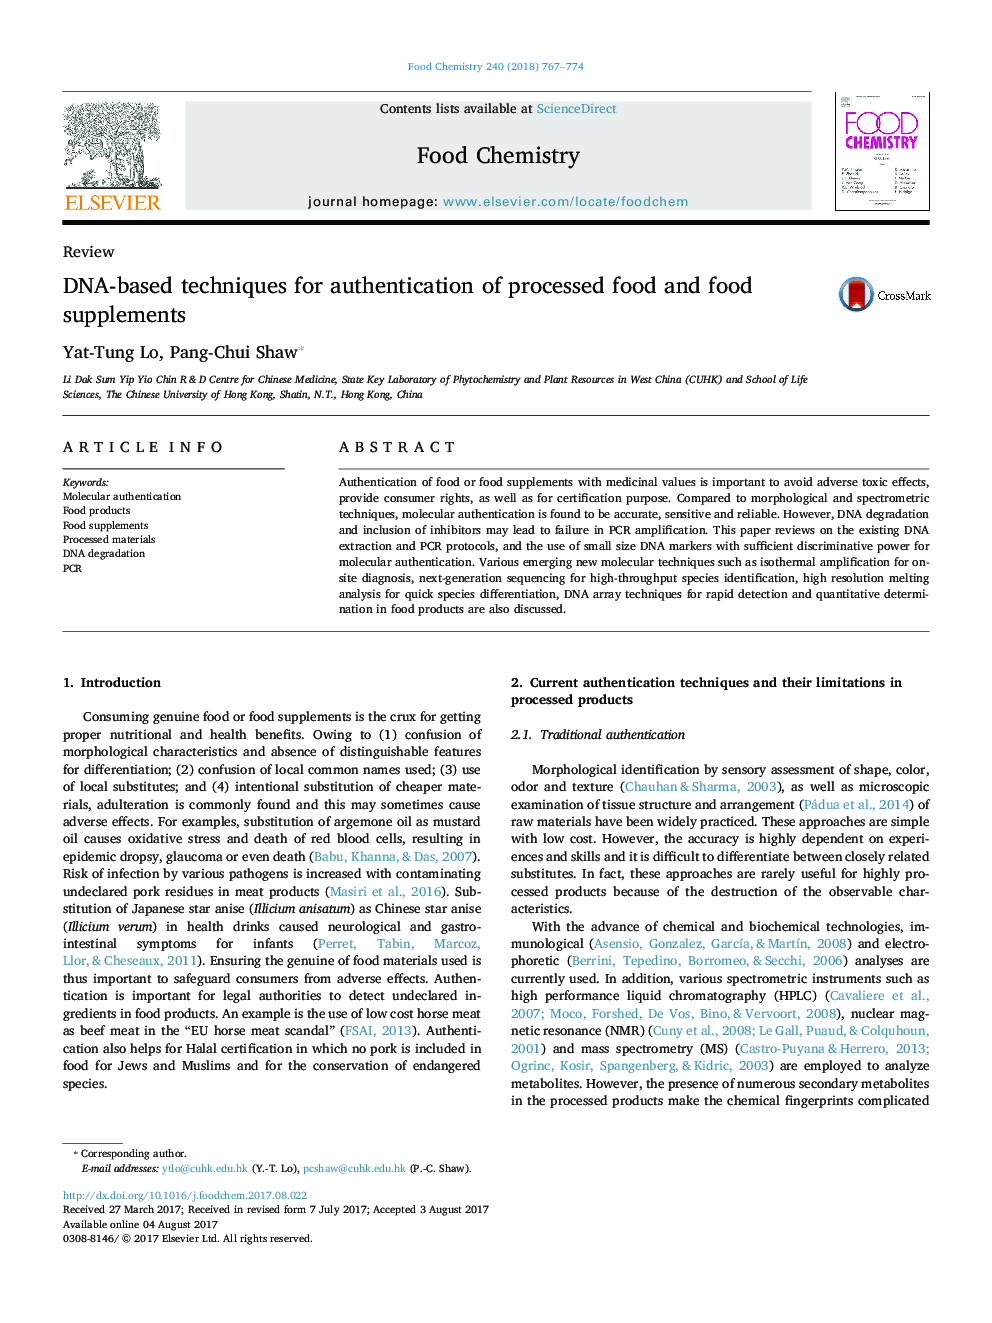 DNA-based techniques for authentication of processed food and food supplements